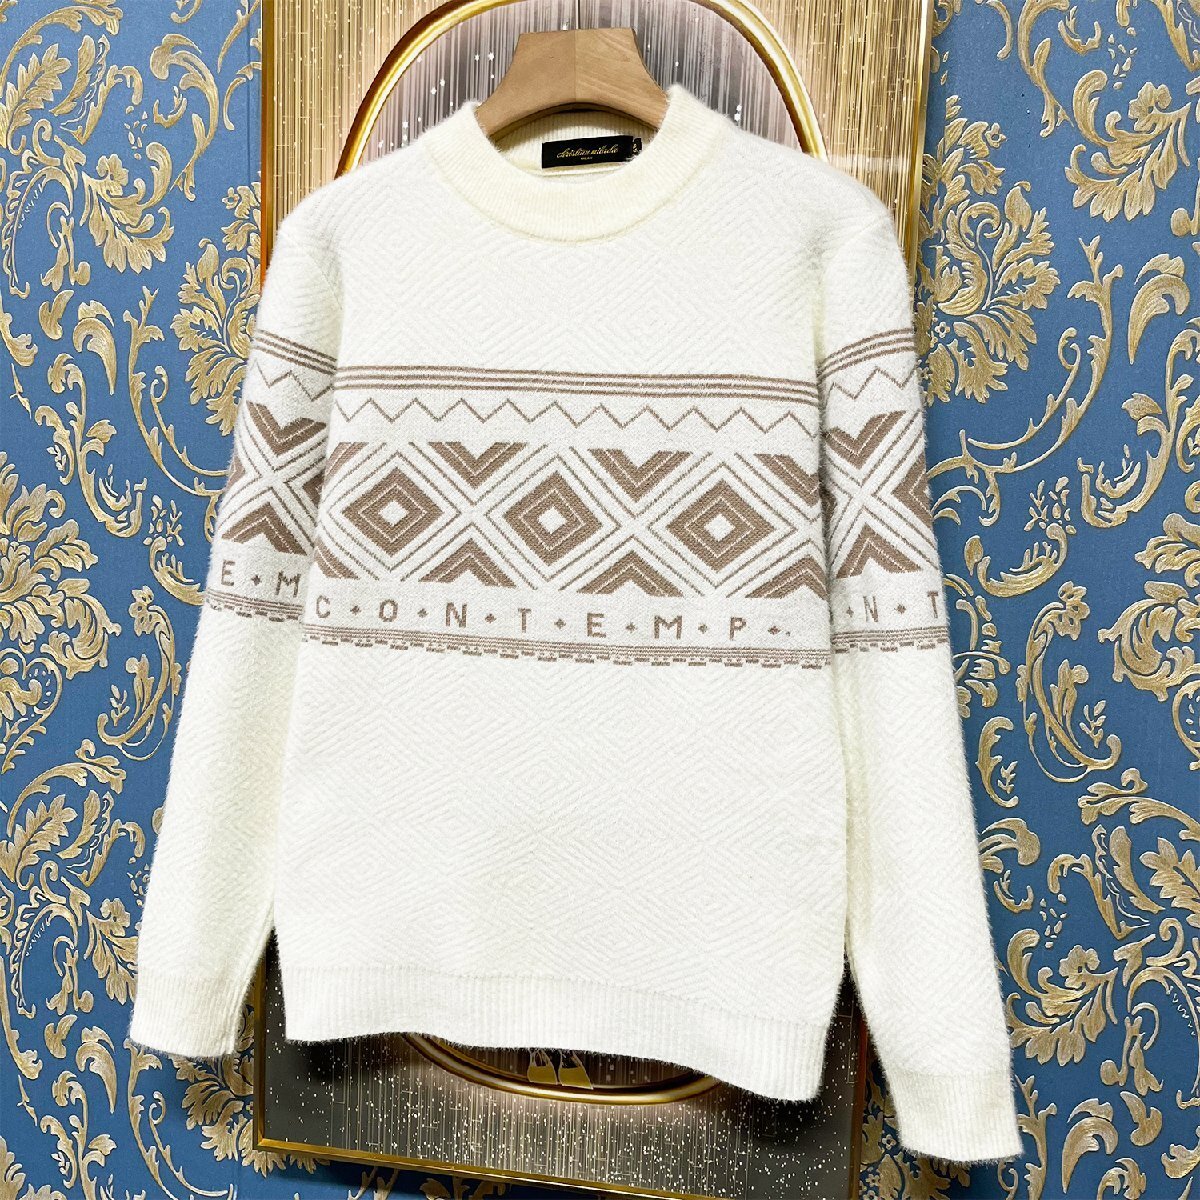  highest grade EU made * regular price 3 ten thousand *christian milada* milano departure * sweater * protection against cold warm soft length of hair total pattern . what . knitted pull over autumn winter XL/50